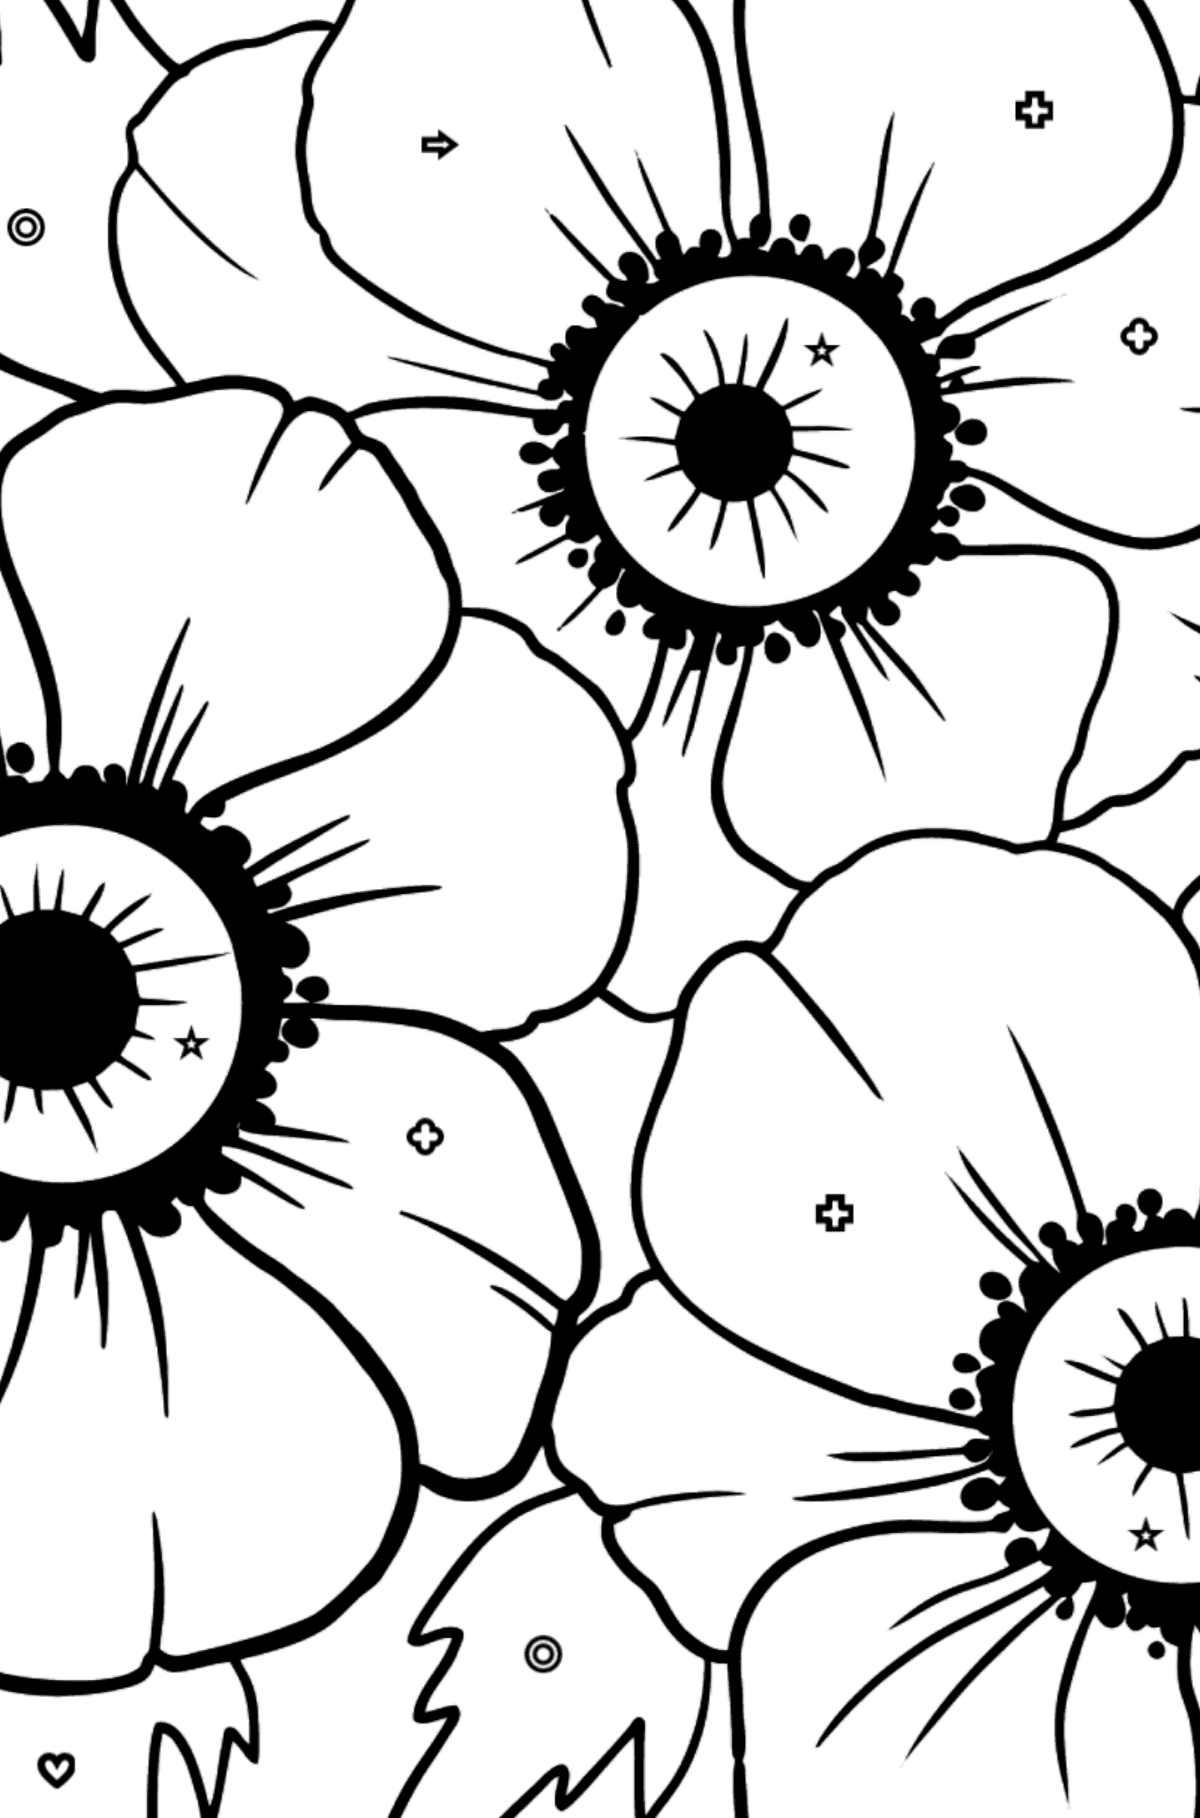 Flower Coloring Page - A Yellow and Orange Anemone Coronaria - Coloring by Geometric Shapes for Kids